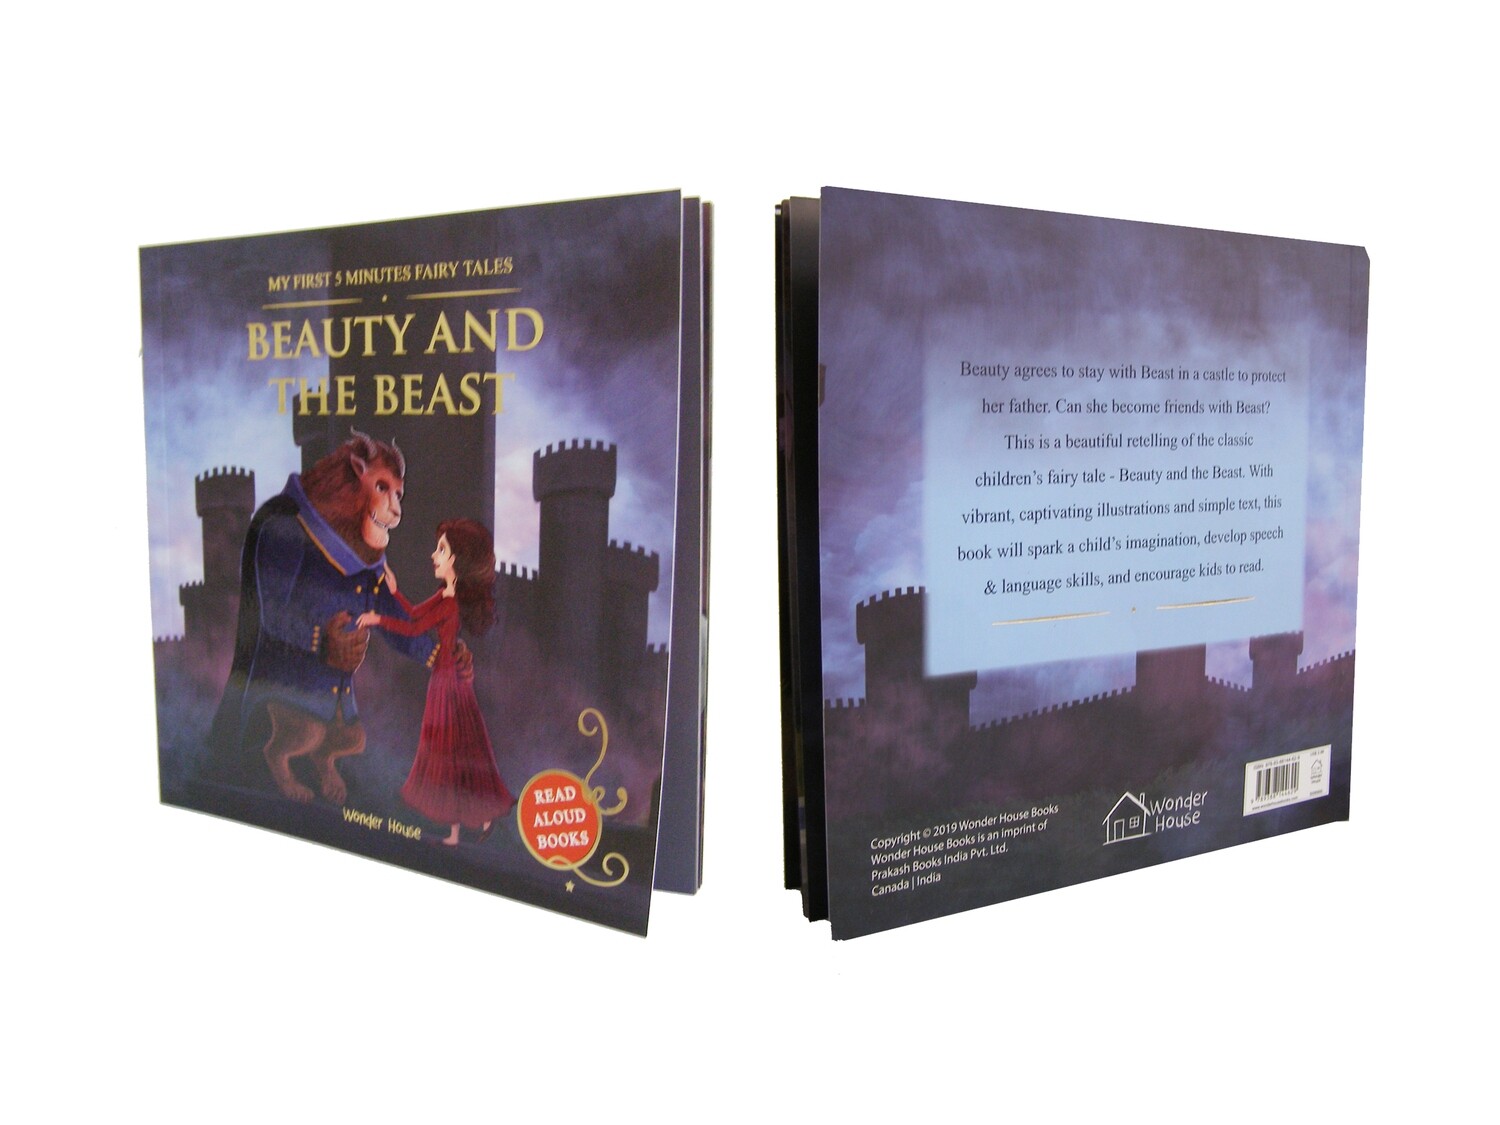 BEAUTY AND THE BEAST - MY FIRST 5 MINUTES FAIRY TALES BOOK